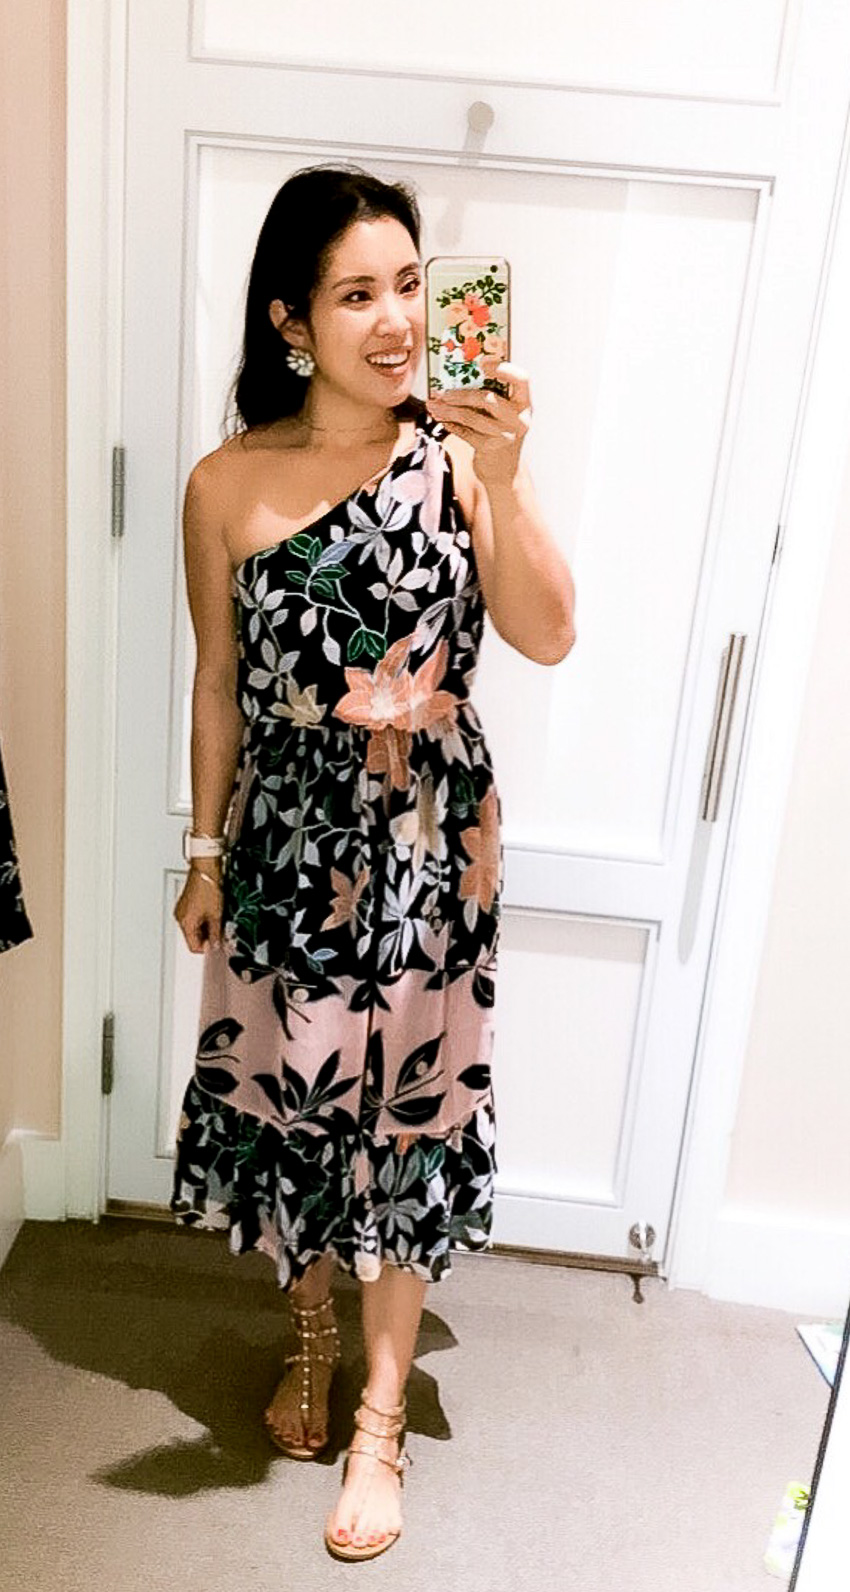 LOFT Sale: Dressing Room Diaries by Dallas fashion blogger cute and little | wild orchid one shoulder dress | loft dressing room review